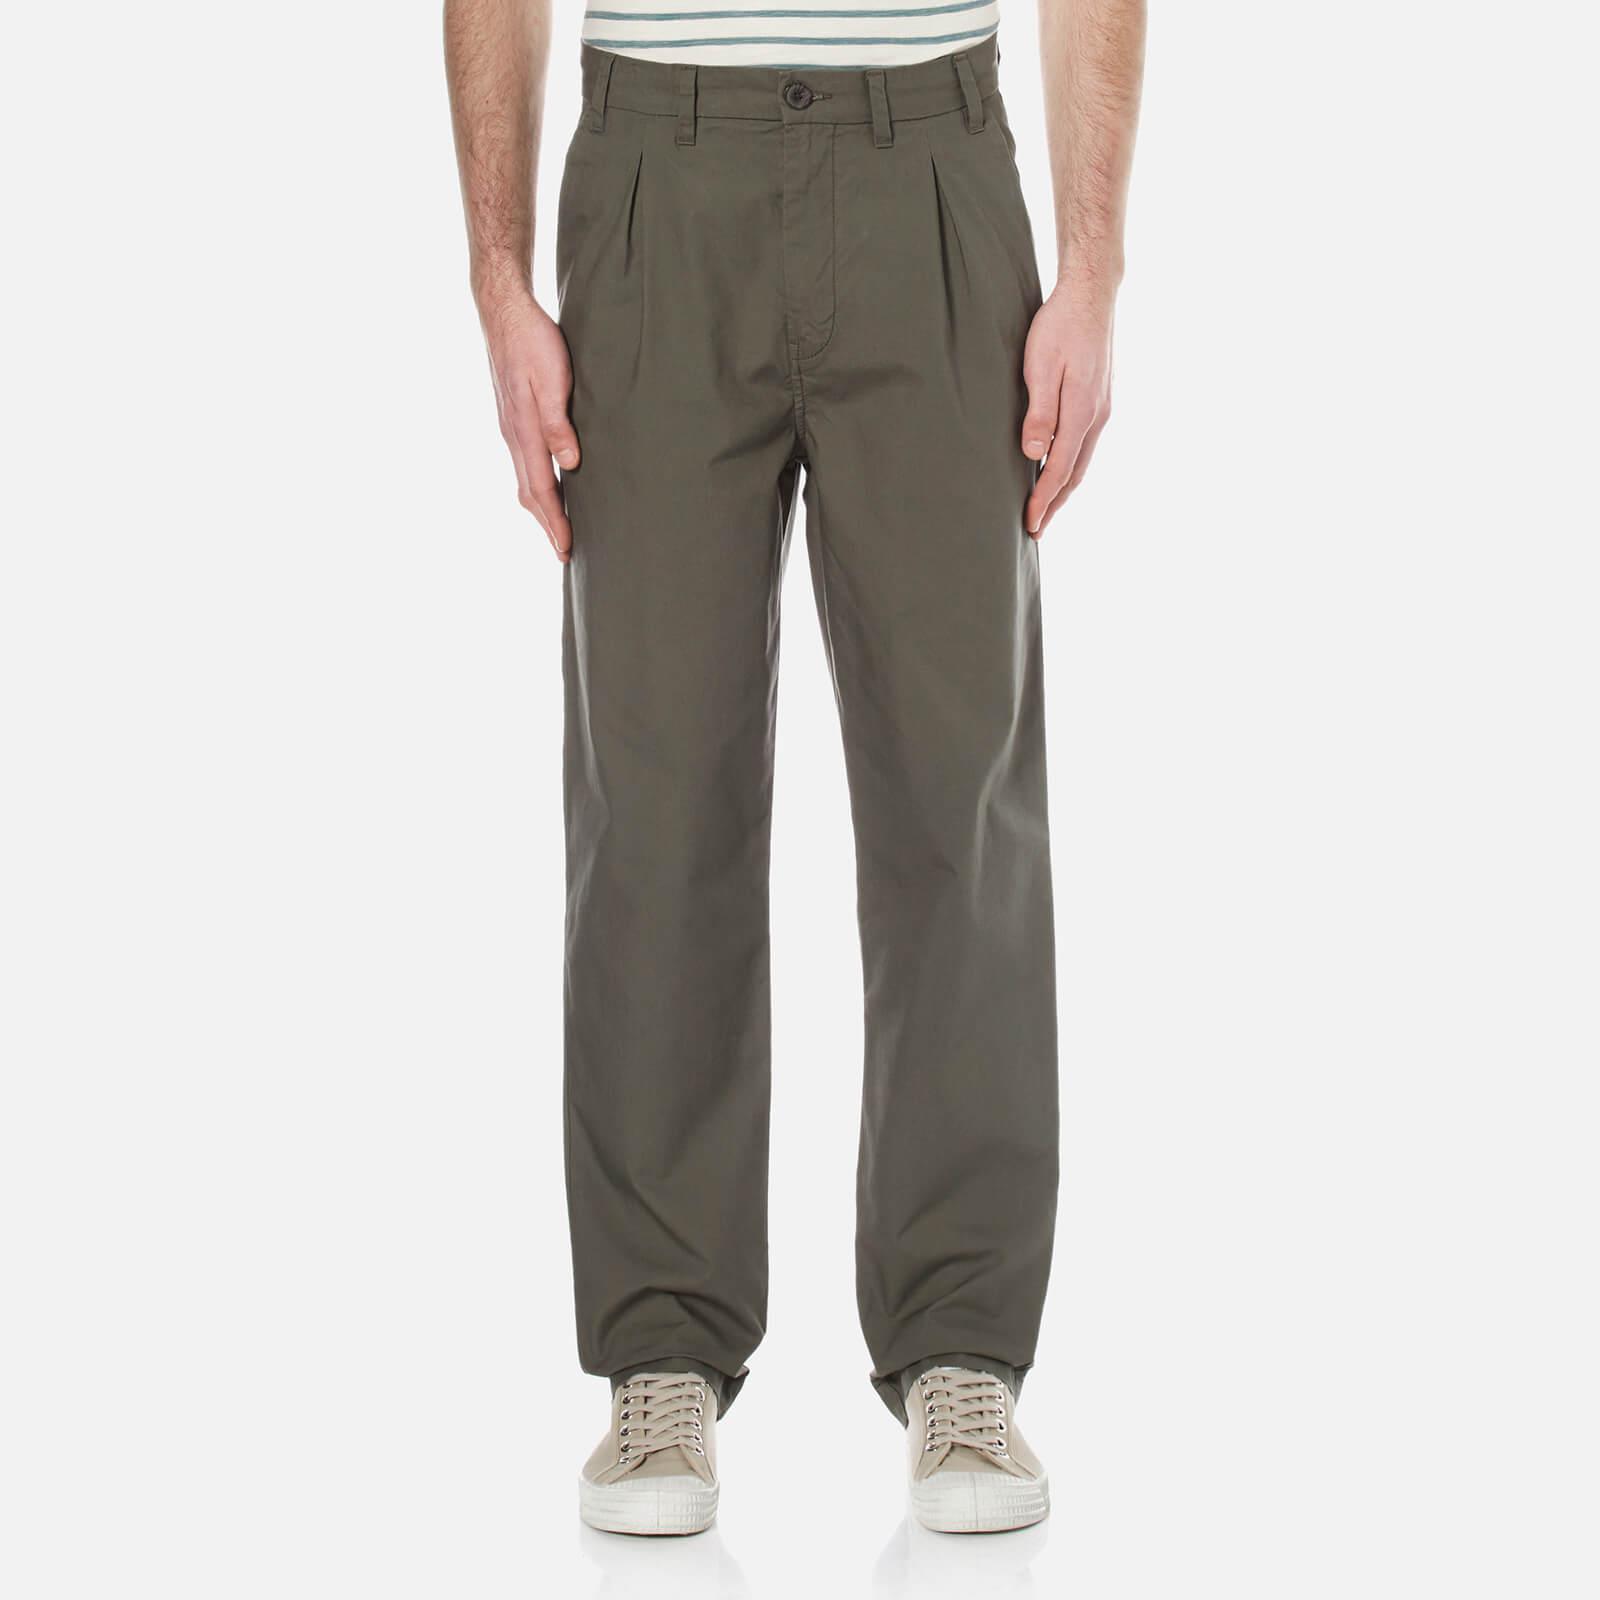 Lyst - Selected Worker Trousers in Green for Men